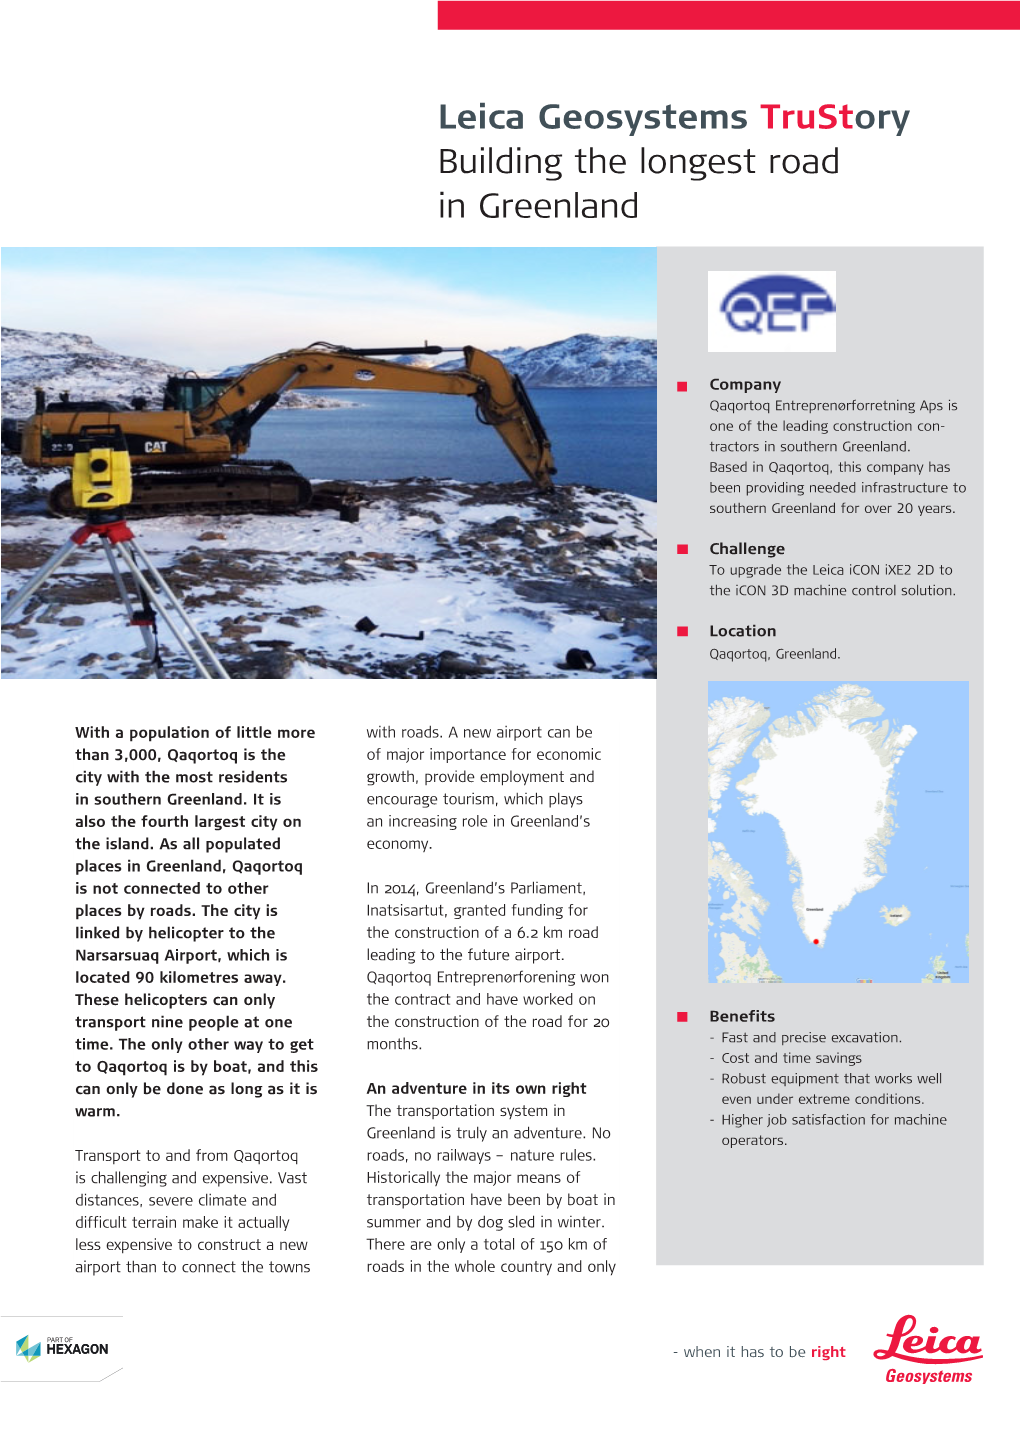 Leica Geosystems Trustory Building the Longest Road in Greenland